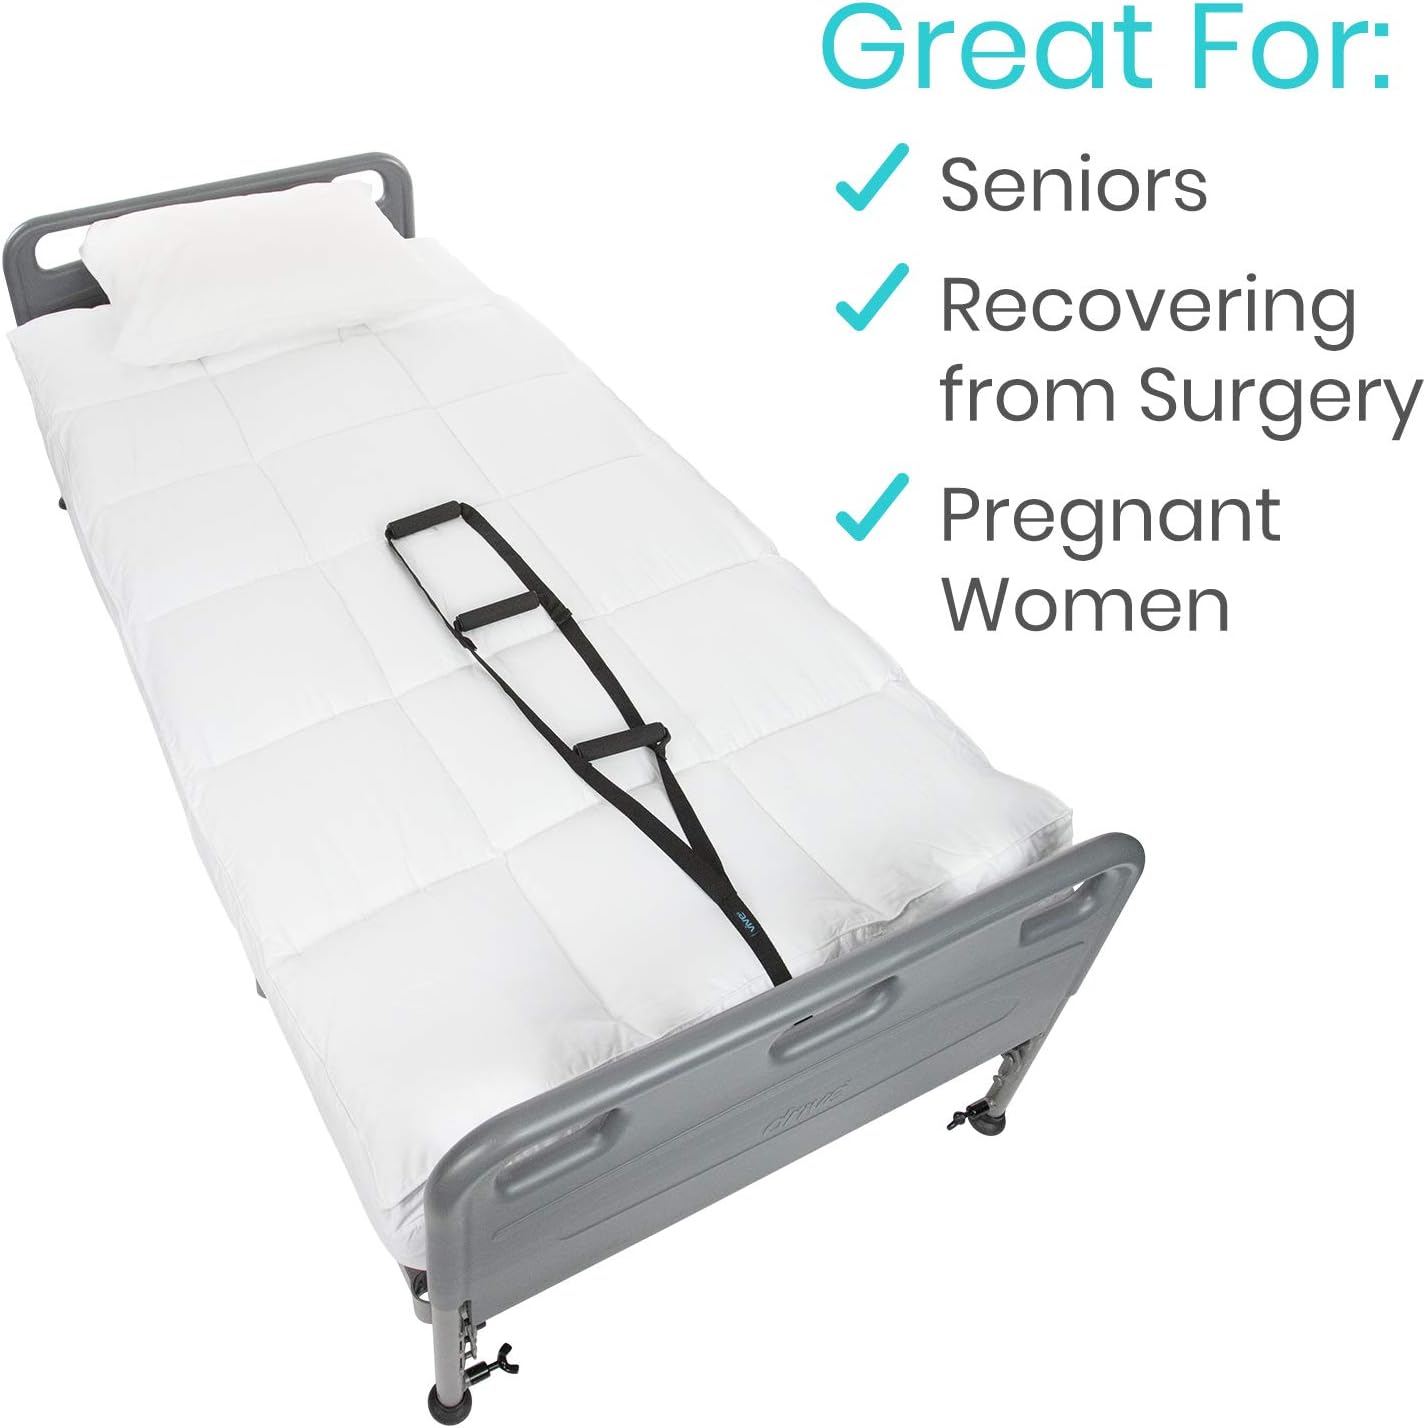 Vive Bed Ladder Assist - Pull Up Assist Device with Handle Strap - Rope Ladder Caddie Helper - Sitting, Sit Up Hoist for Elderly, Senior, Injury Recovery Patient, Pregnant, Handicap - Padded Hand Grip